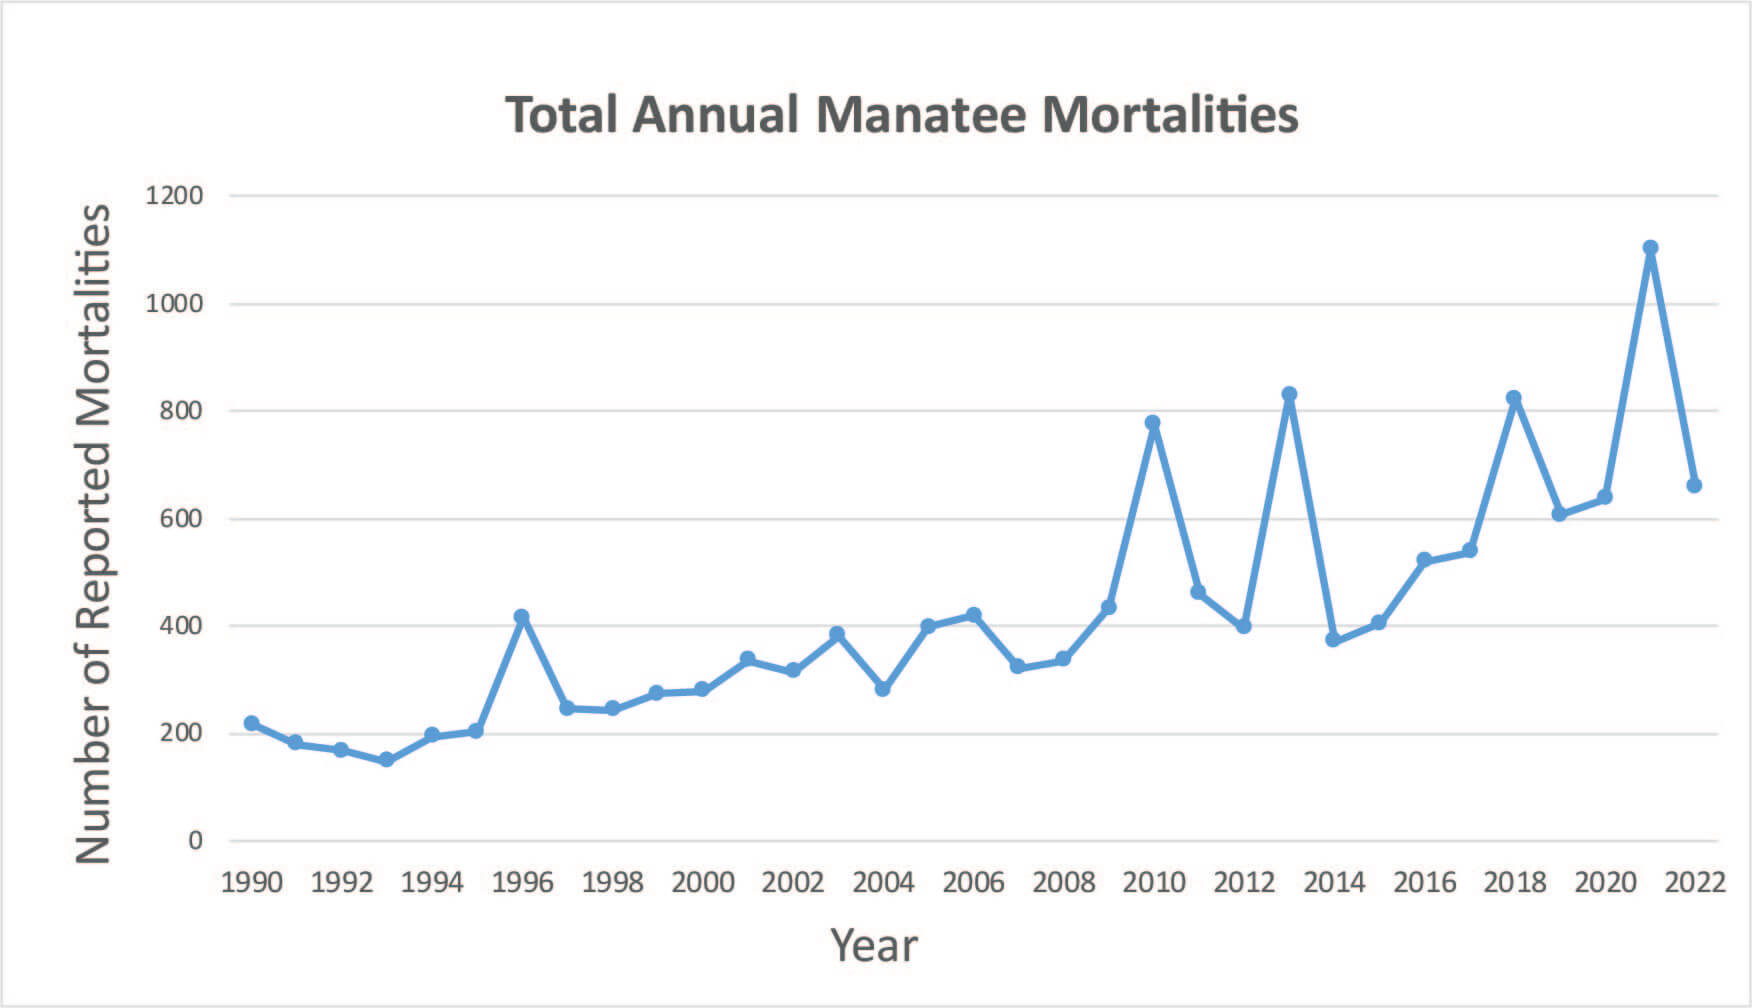 Count of total manatee mortalities starting in 1990, as of September 2022, increasing over time.